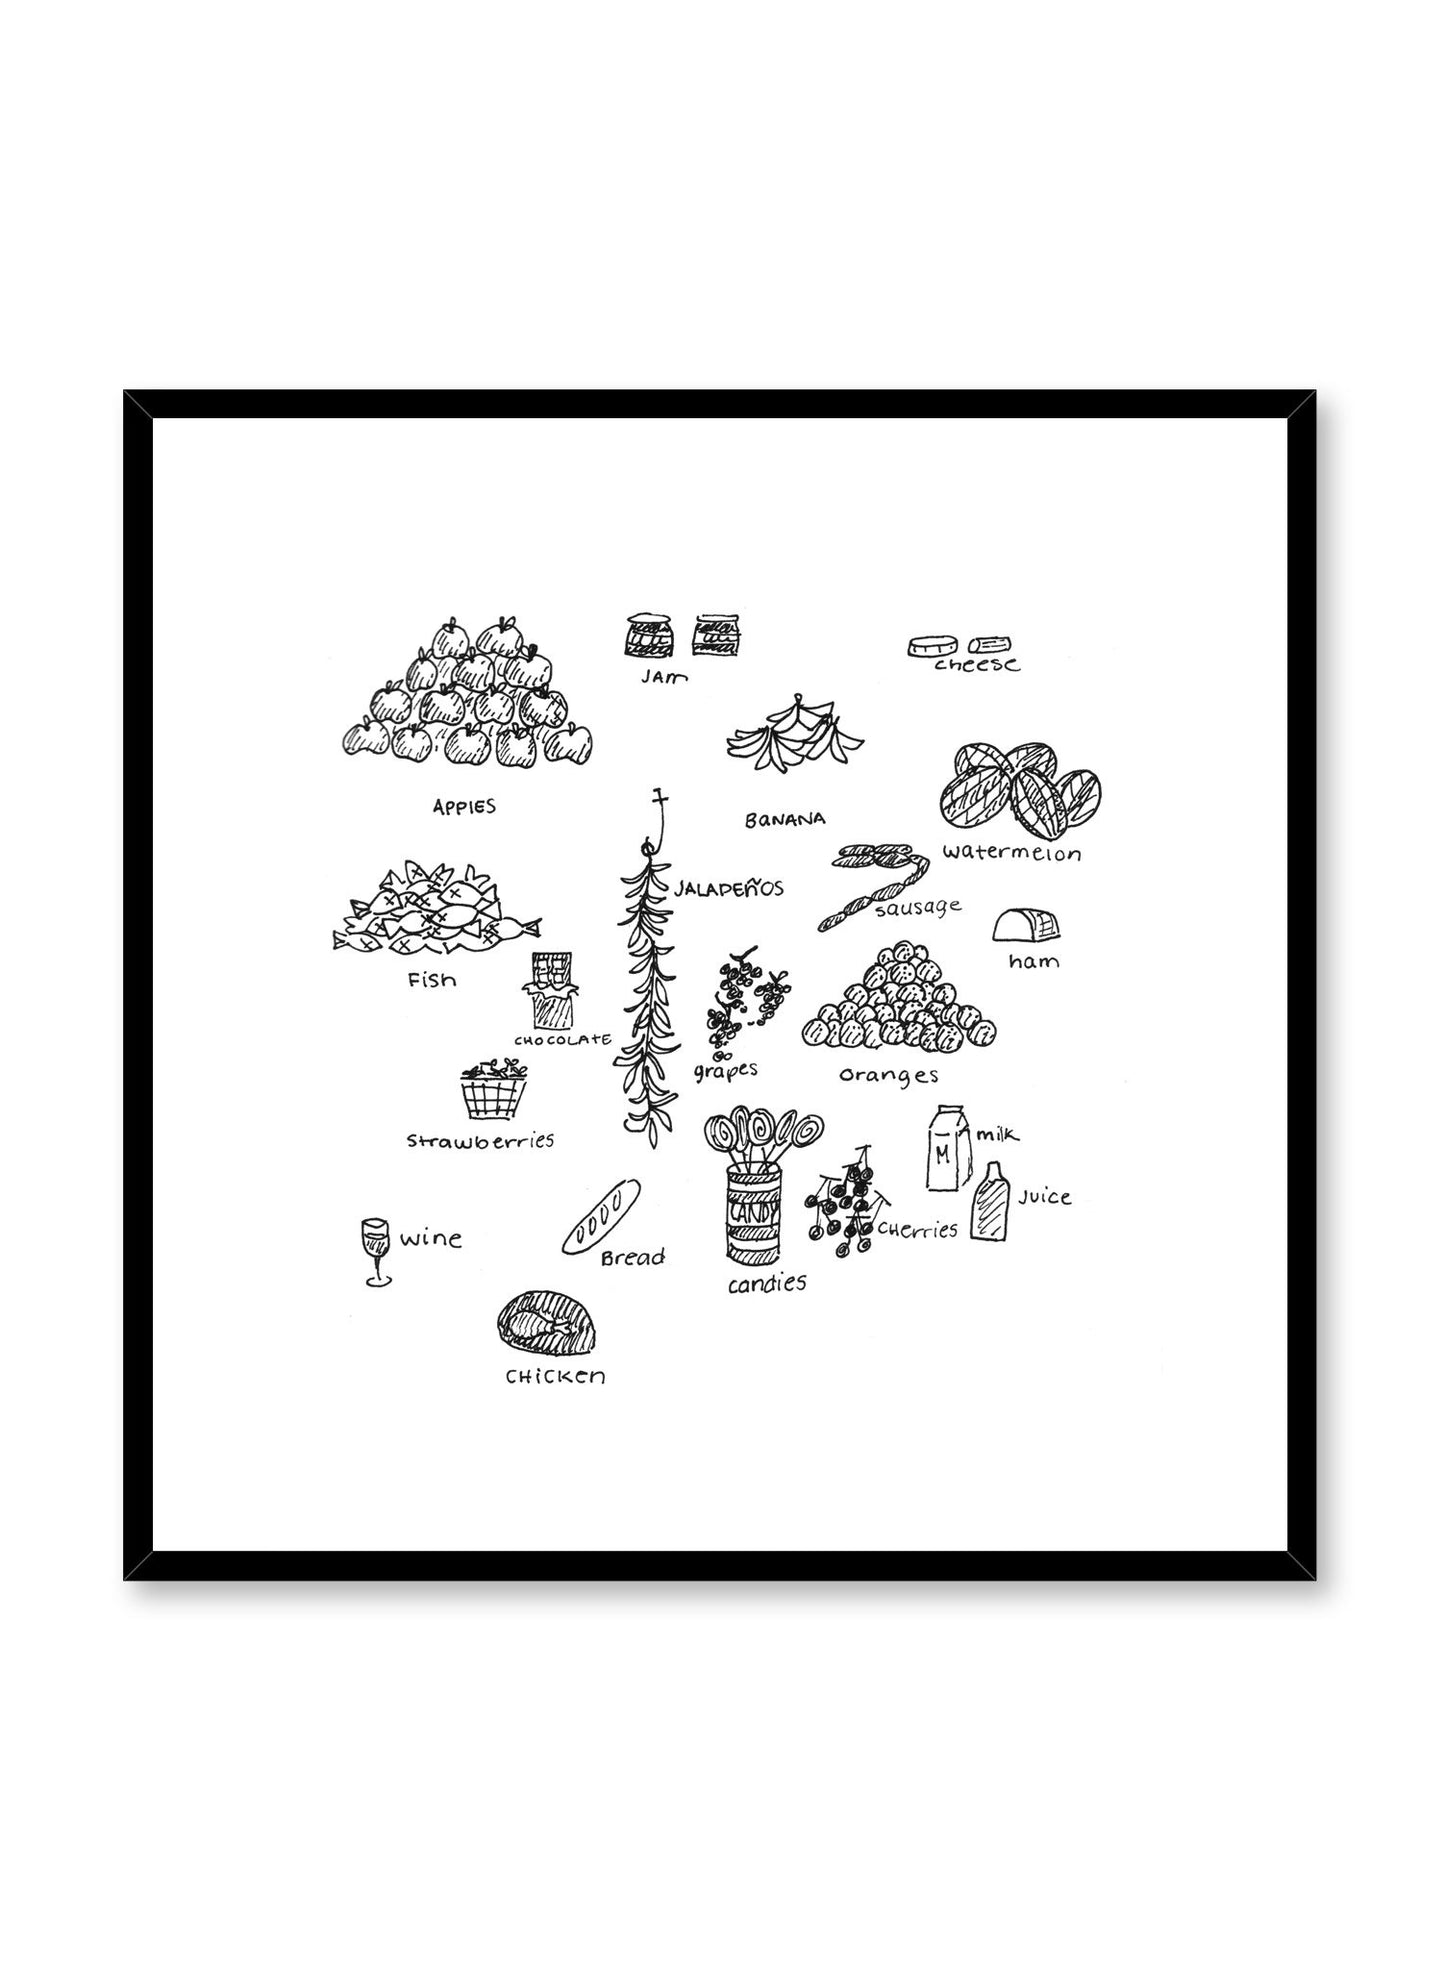 Minimalist poster by Opposite Wall with At The Market illustration